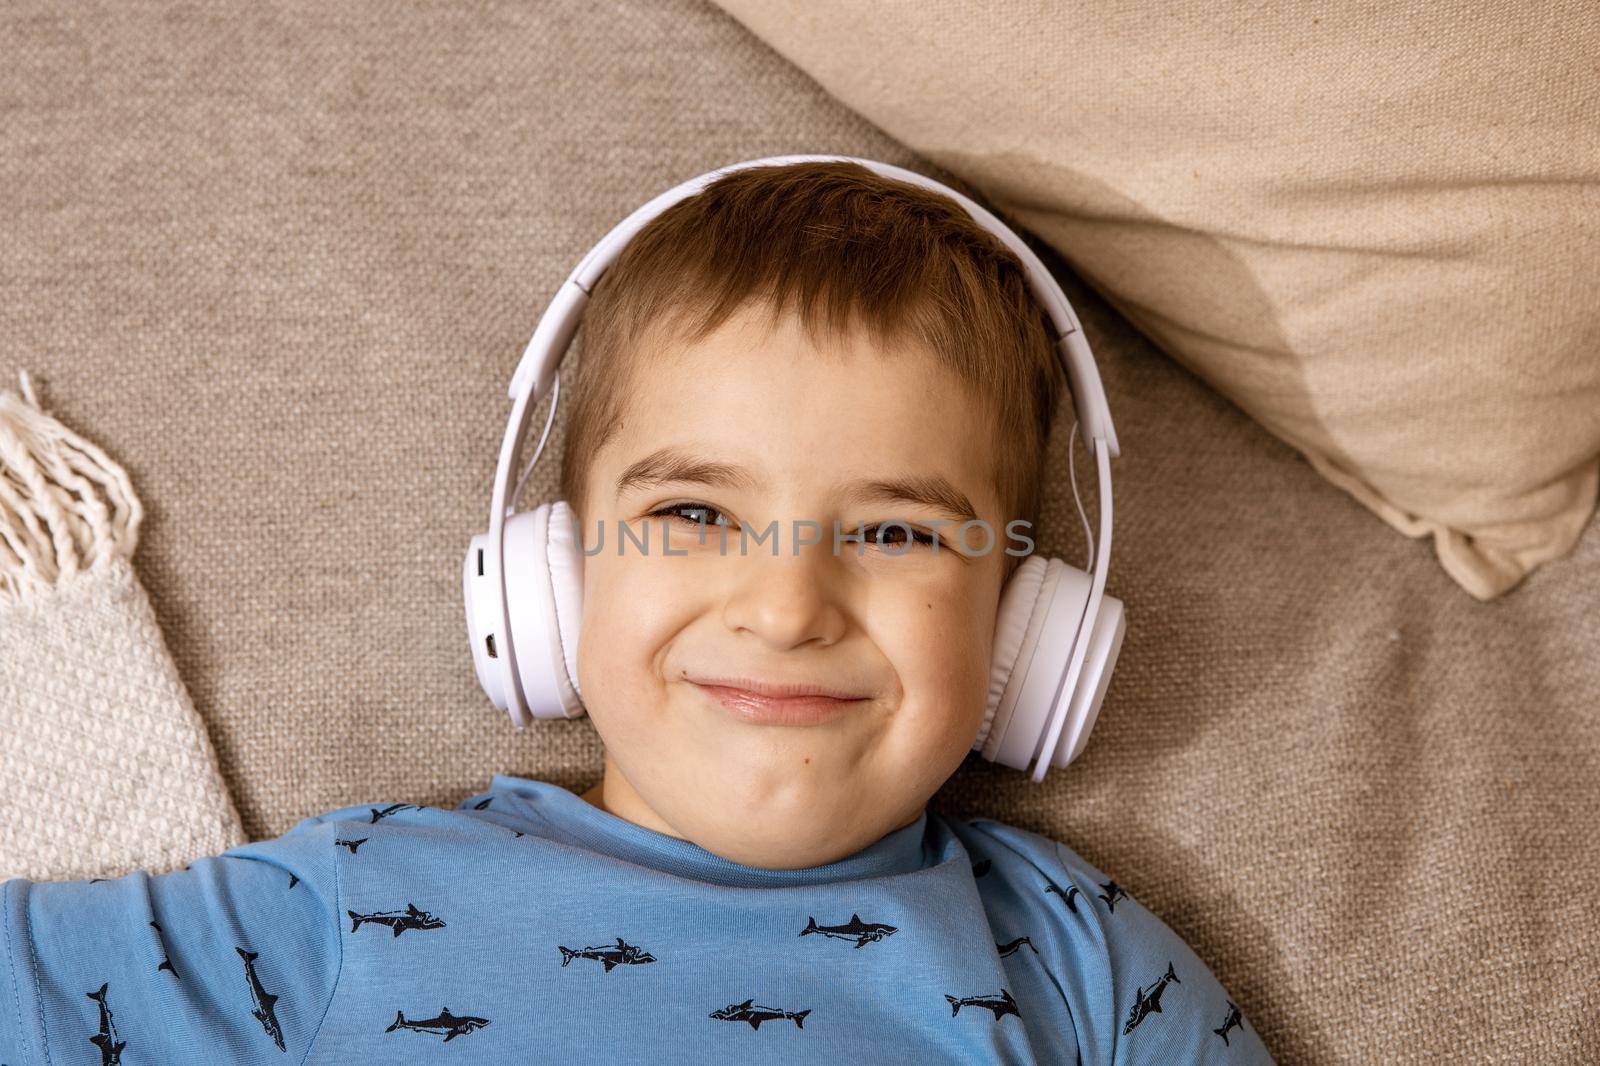 Little caucasian boy with blue shirt and white headphones listening music or audio book on the couch at home. Cute child relaxing, resting in his room. Smiling, happy kid. by creativebird